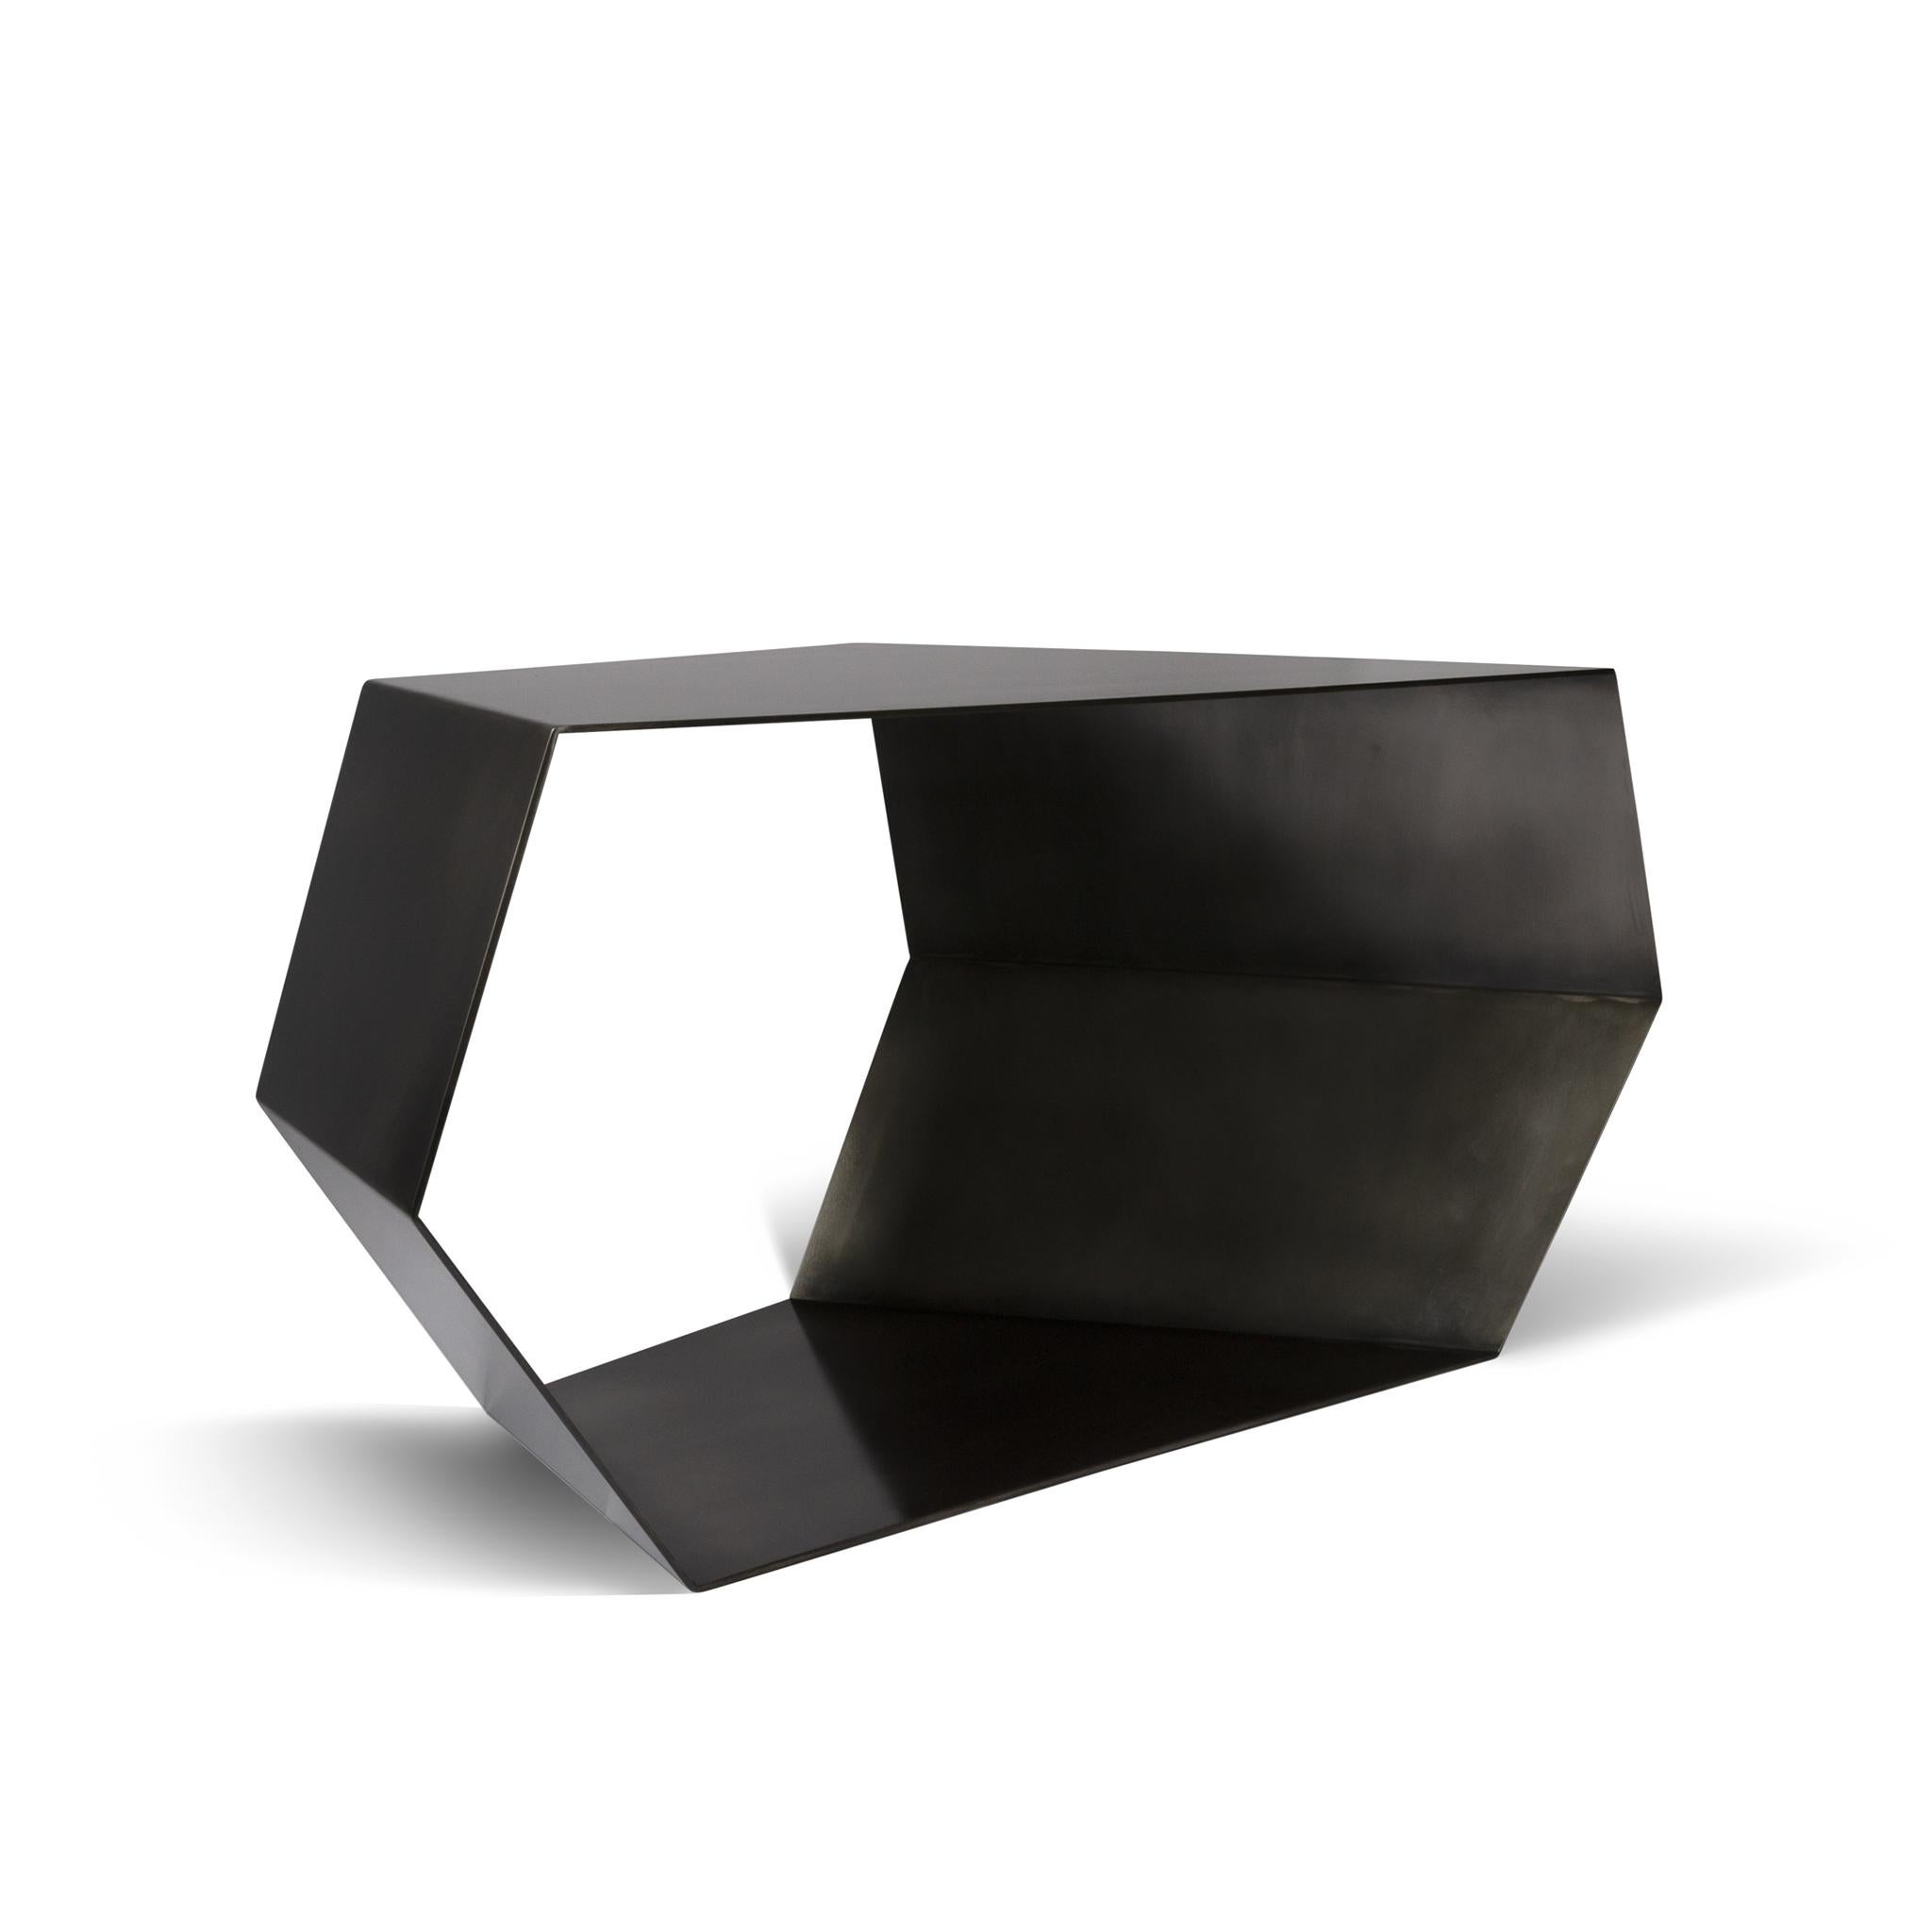 The open geo table is a striking yet Minimalist display or center table. Solid steel fabrication with a contemporary blackened finish, the open form plays with themes of transparency and mass and is a perfect statement table for residential or